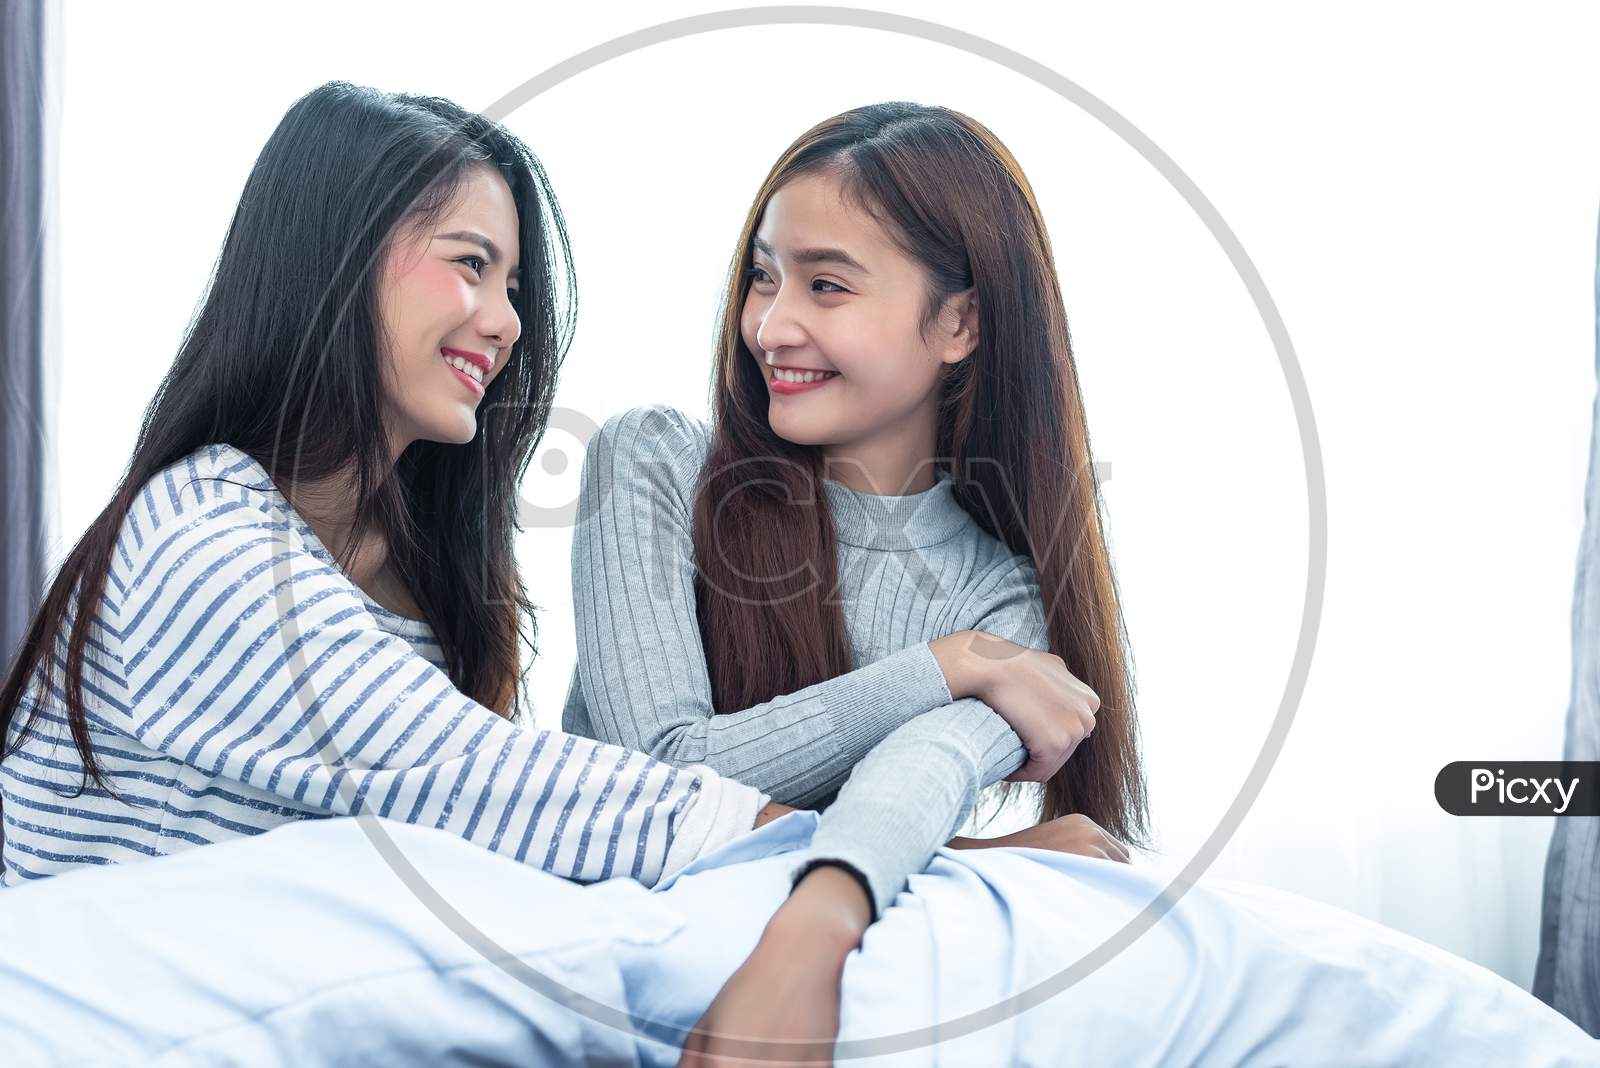 Two Asian Lesbian Women Looking Together In Bedroom. Couple People And Beauty Concept. Happy Lifestyles And Home Sweet Home Theme. Cushion Pillow Element And Window Background.